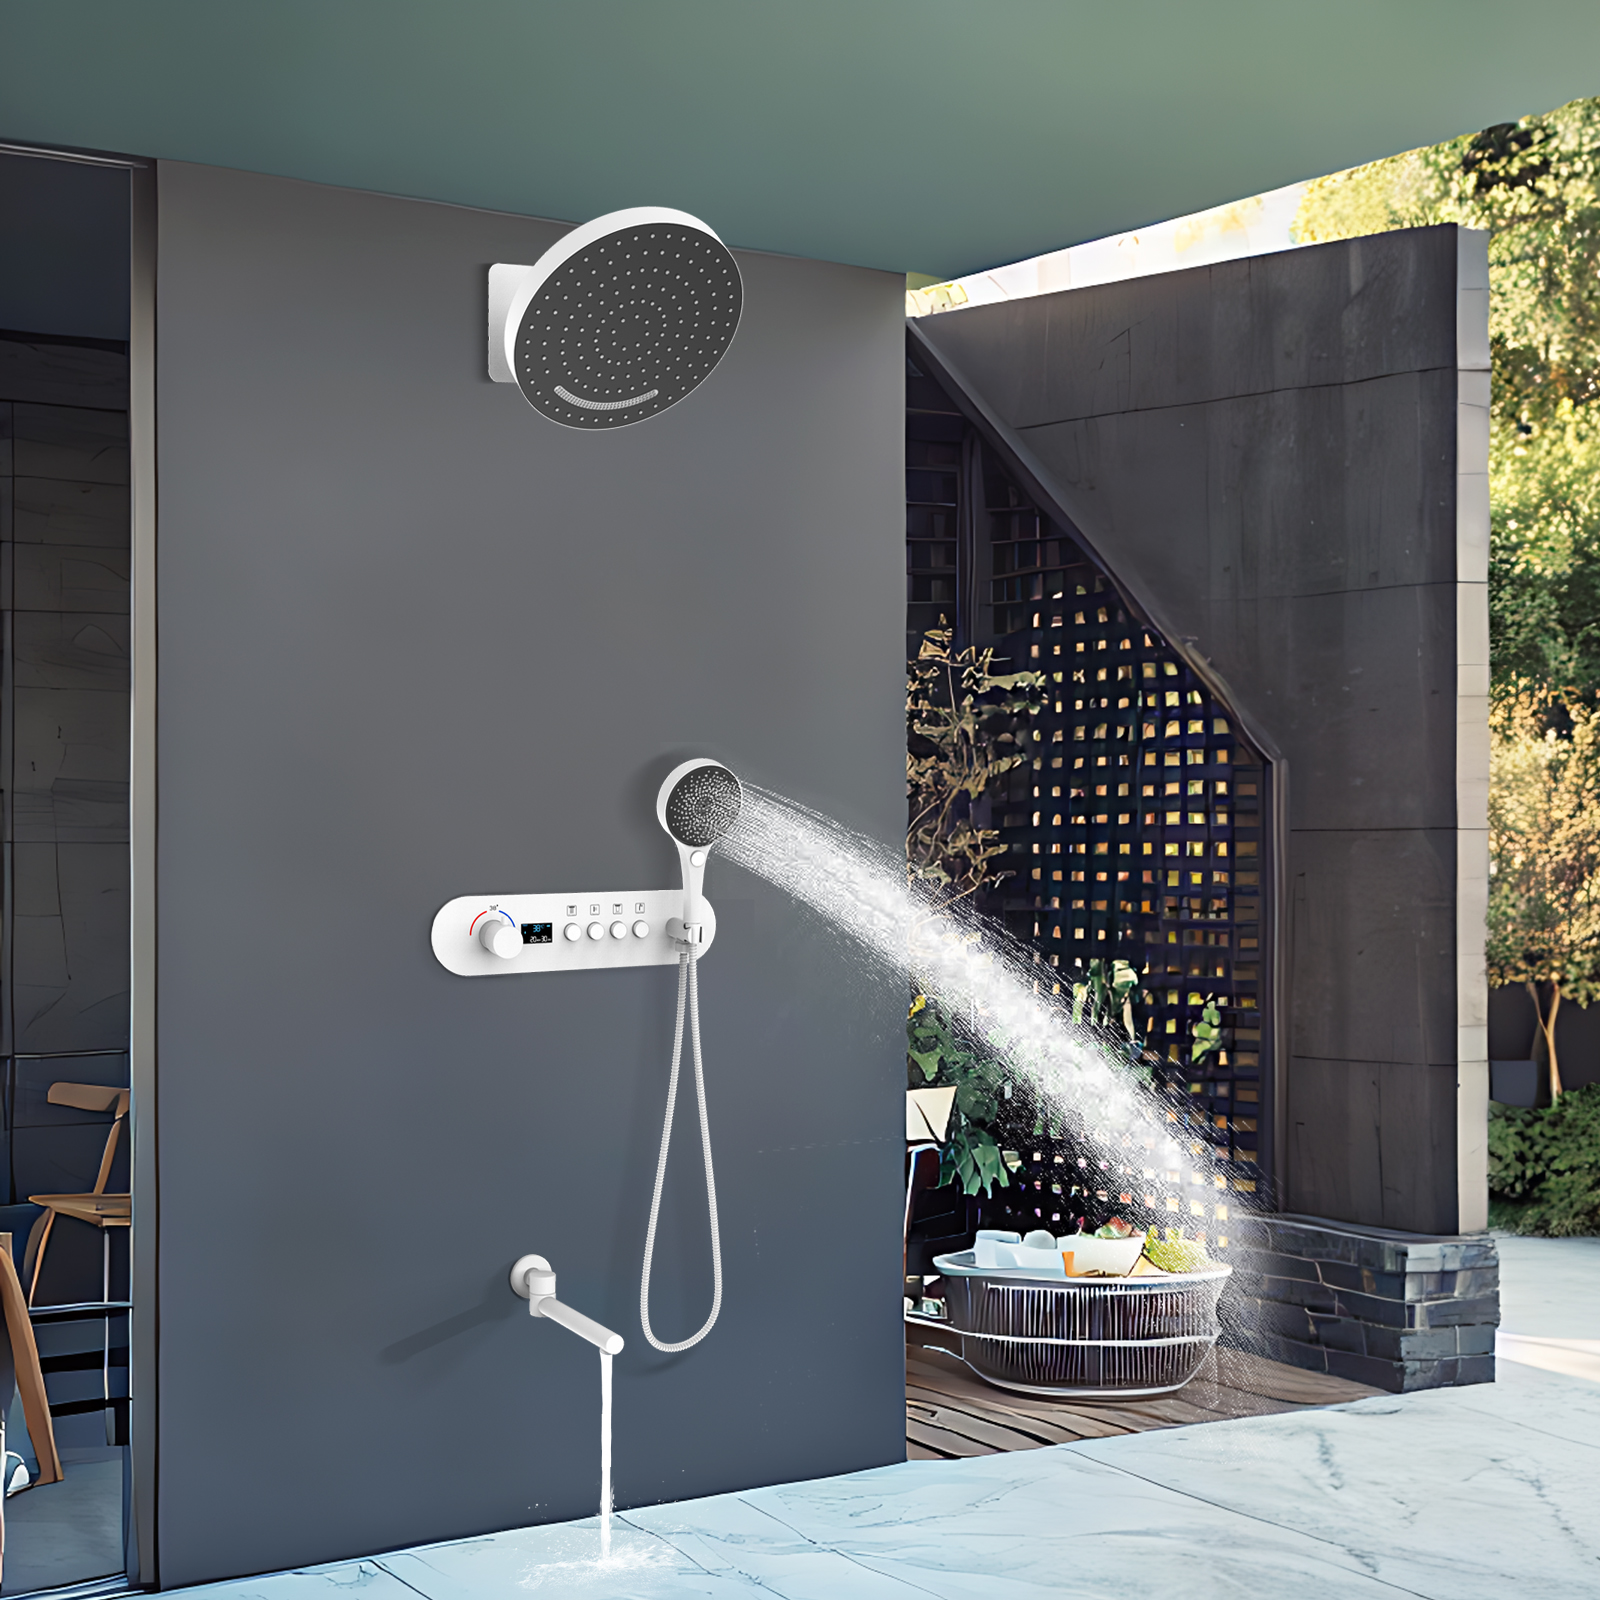 White Round Wall -mounted Rainfall And Constant Temperature Shower Mixing Valve Brings Down The Water Outlet